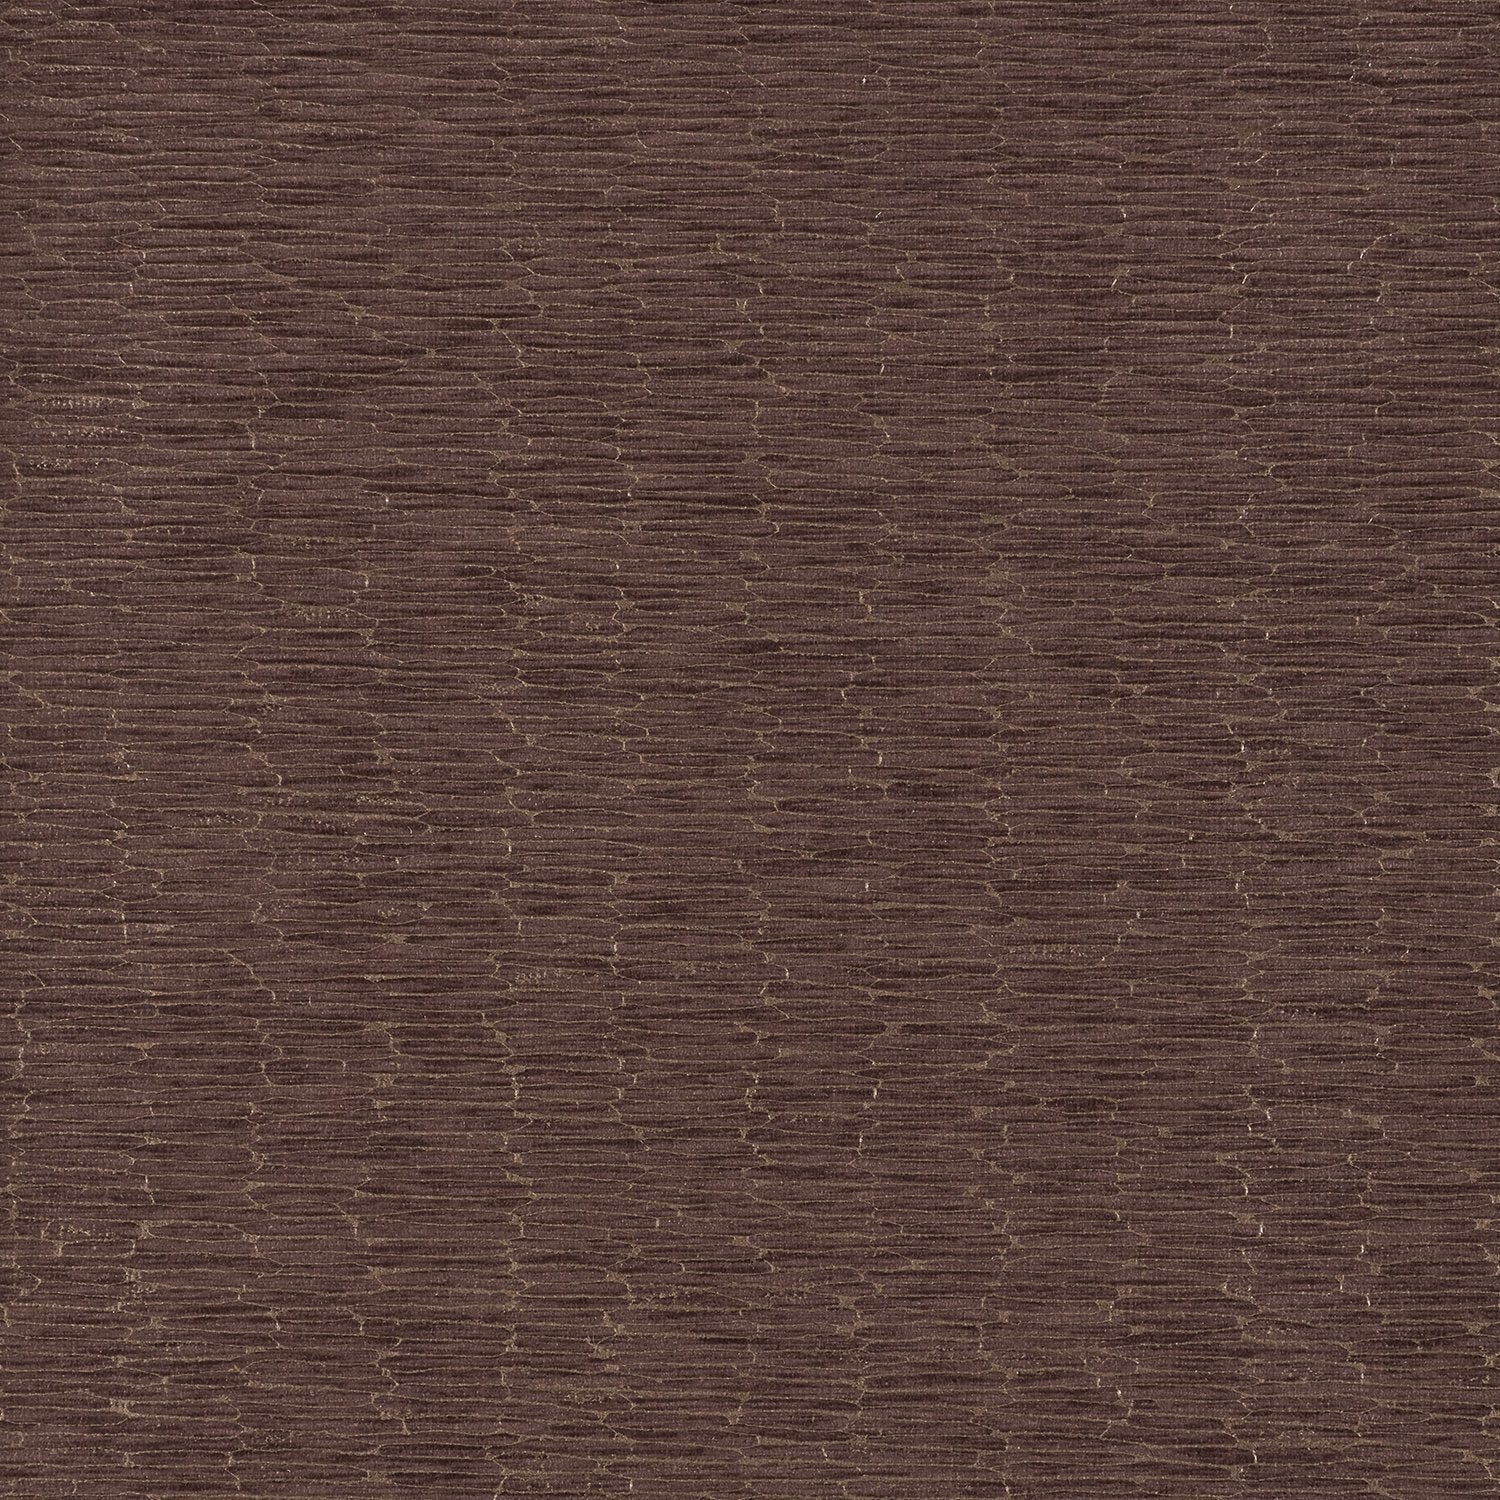 Chipper - Y46861 - Wallcovering - Vycon - Kube Contract